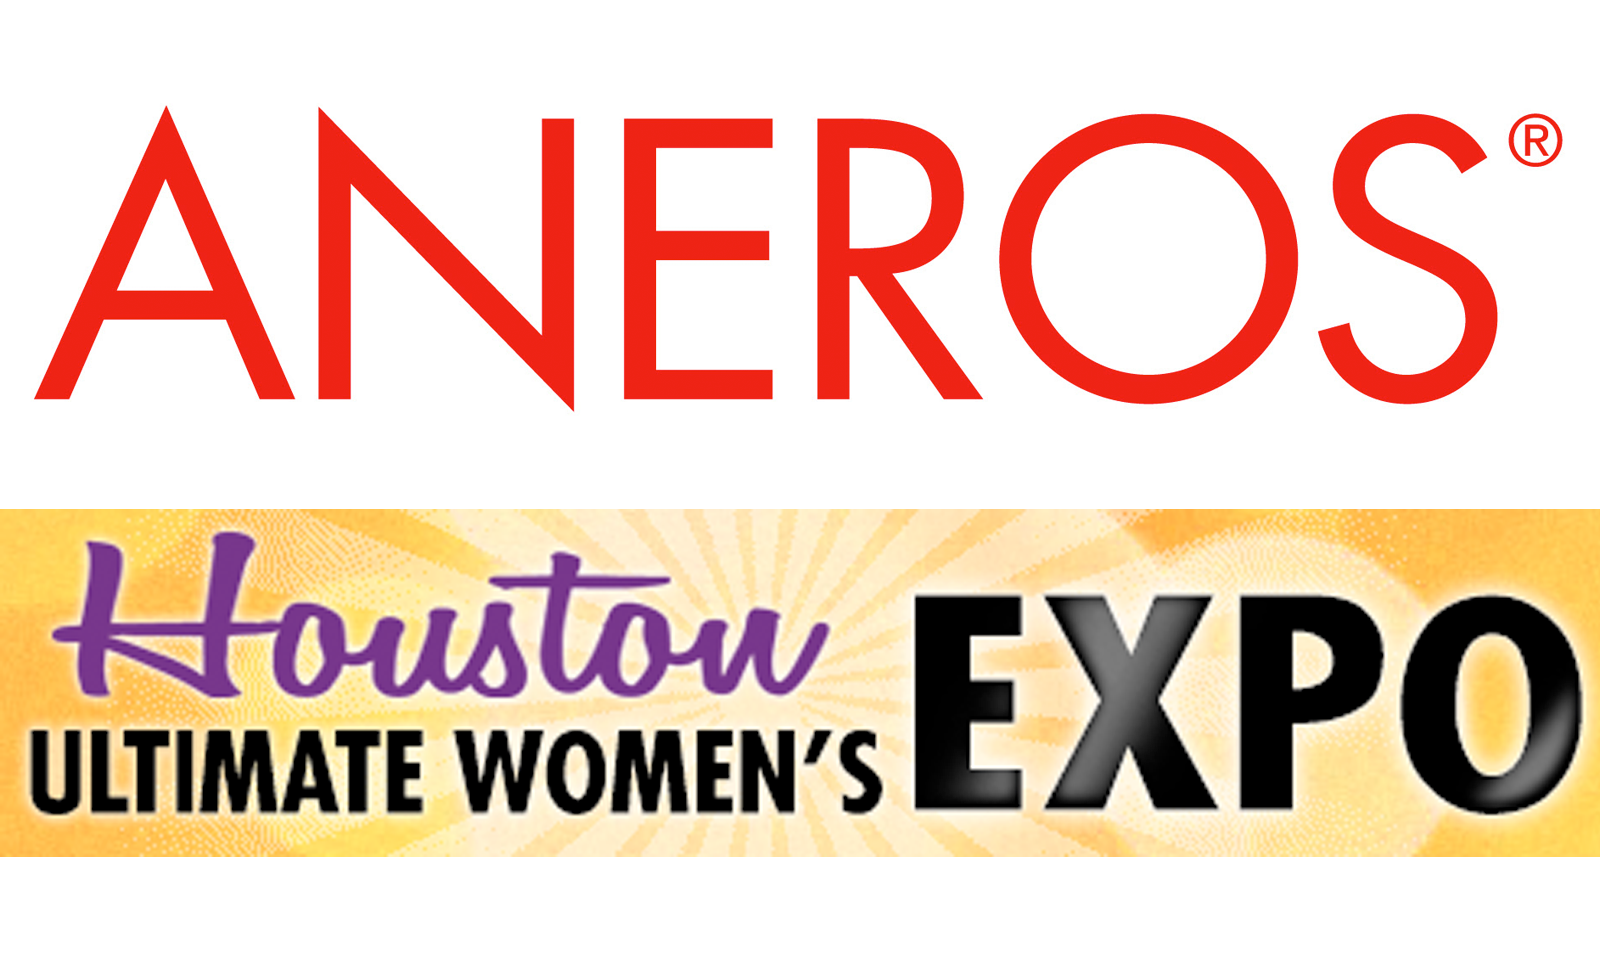 Aneros Reps Headed to 2019 Houston Ultimate Women’s Expo